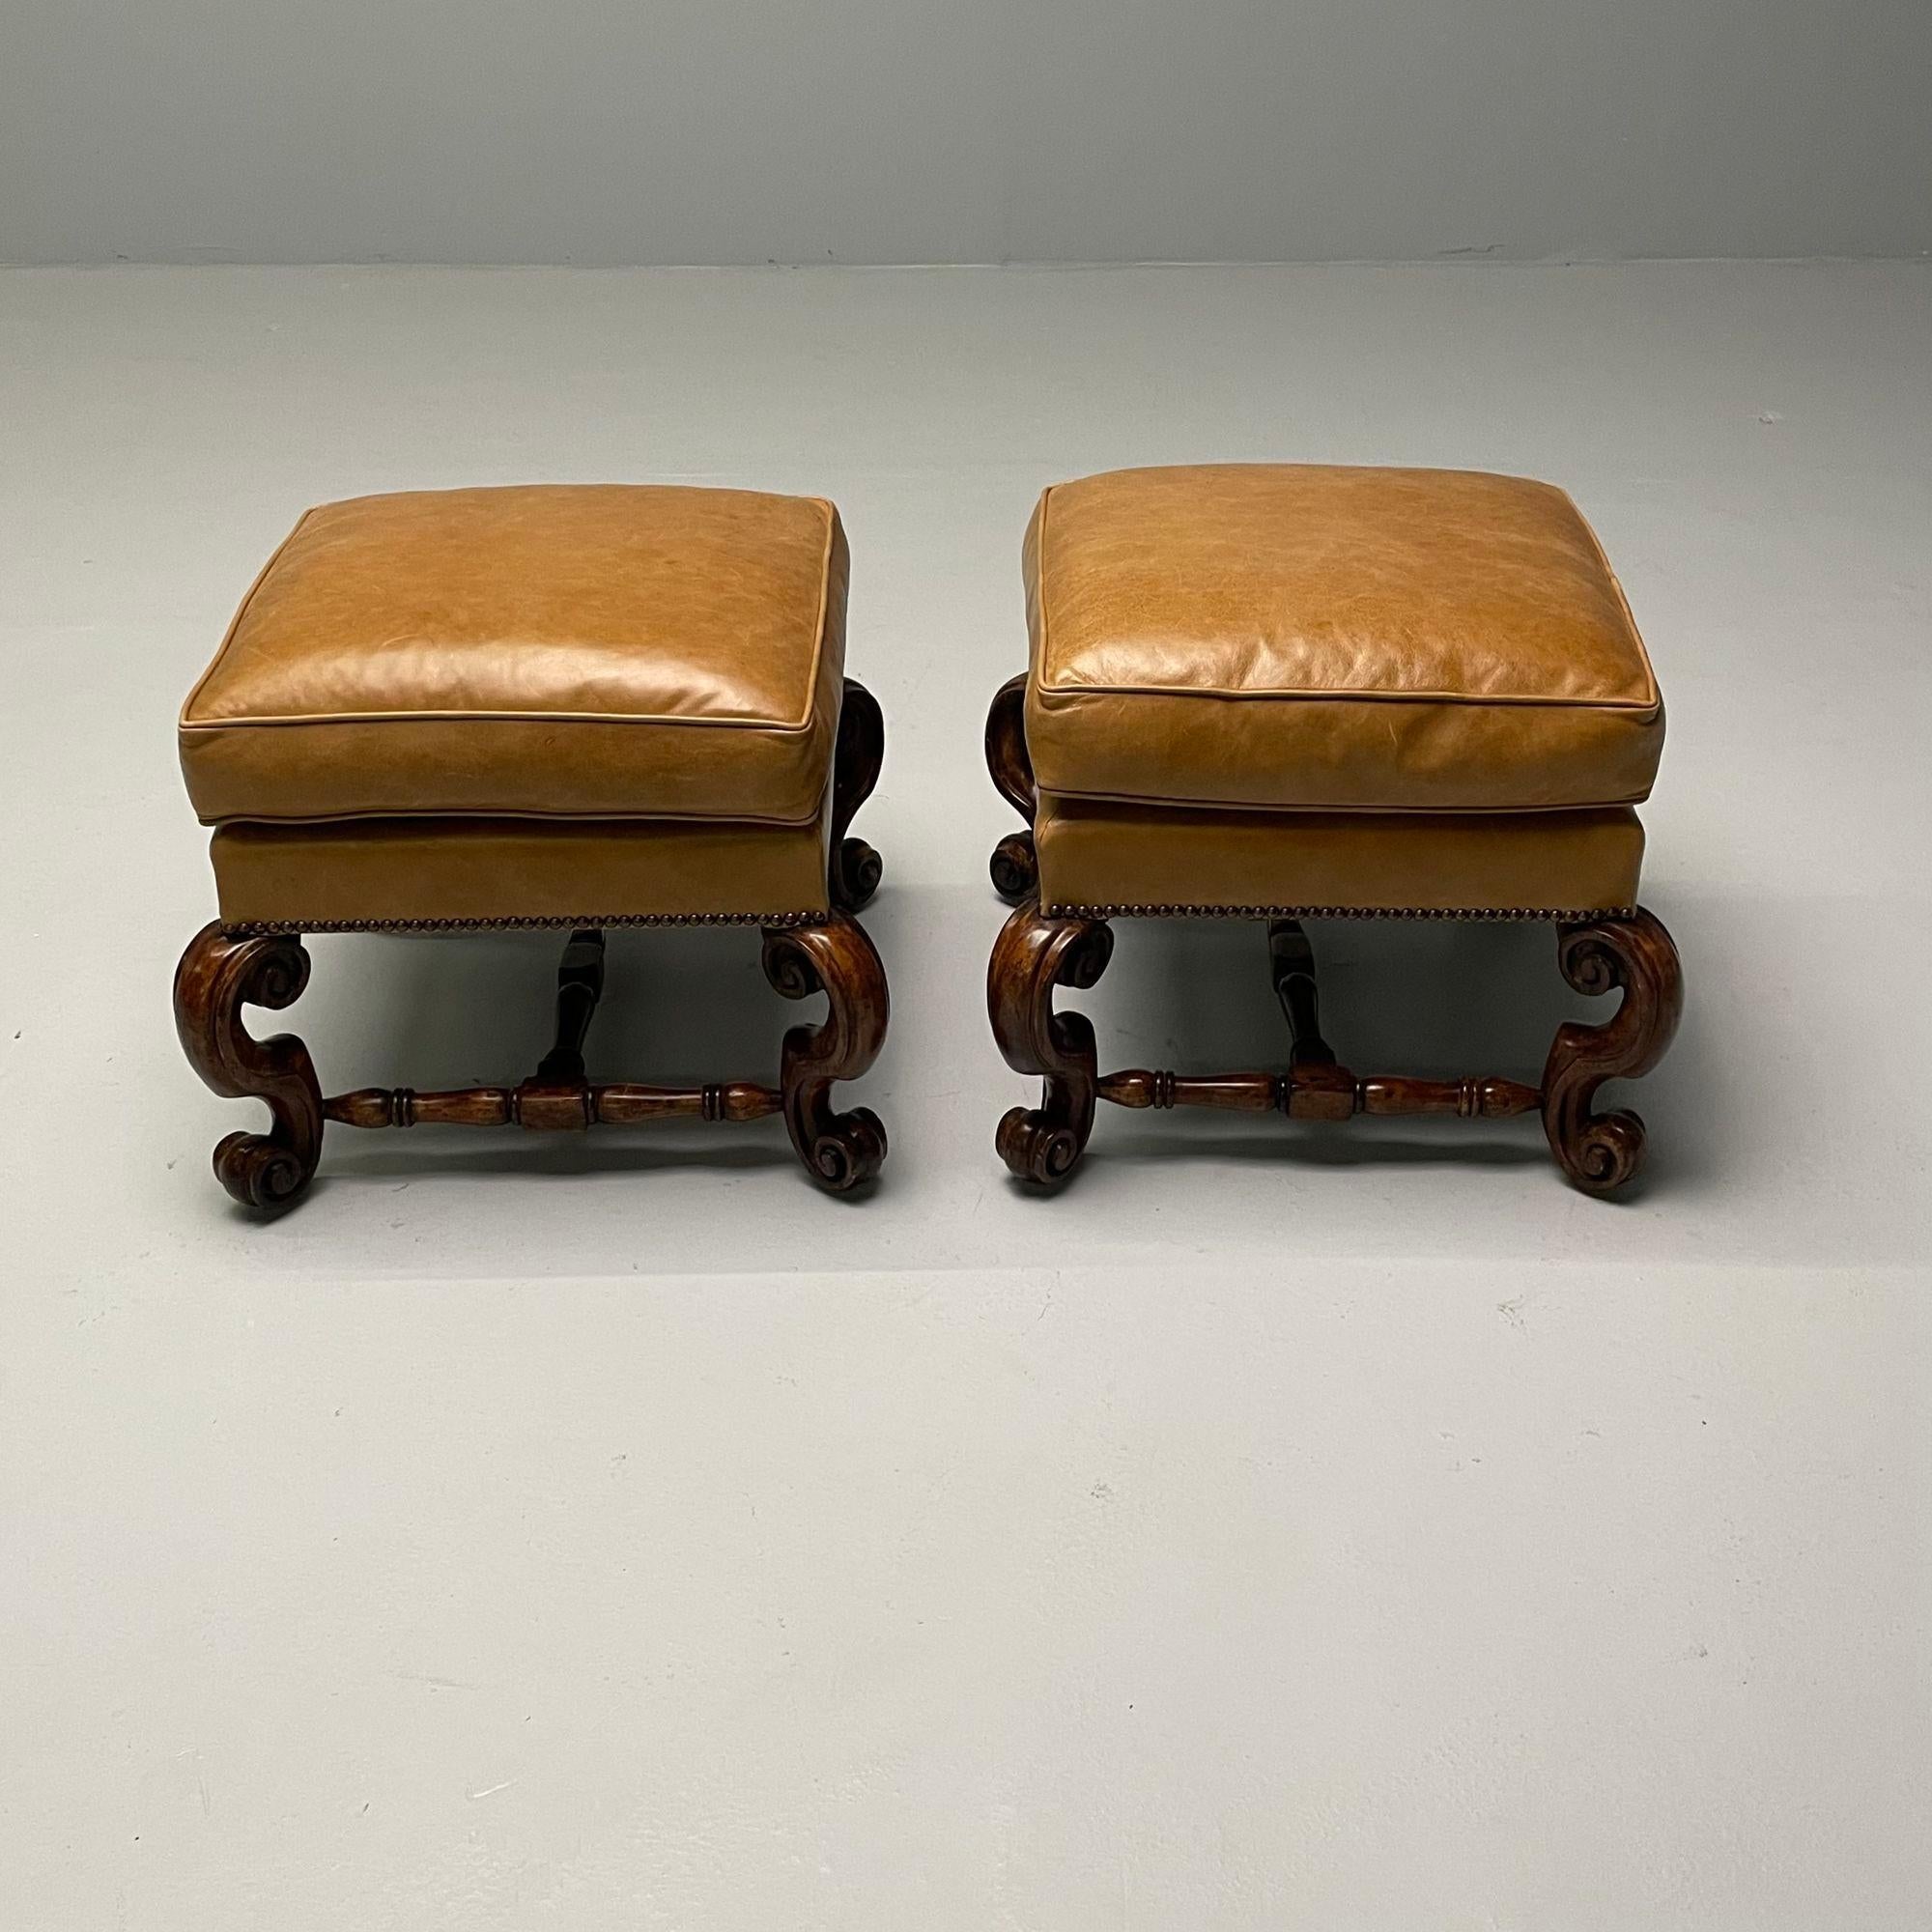 Georgian, Cabriole Leg Ottomans, Tan Leather, Wood, USA, 2000s

Pair of square georgian style leather and wood ottomans. Each piece has nail-head detailing and tan leather seat cushions. Each ottoman sits on an elaborate stained wood base with